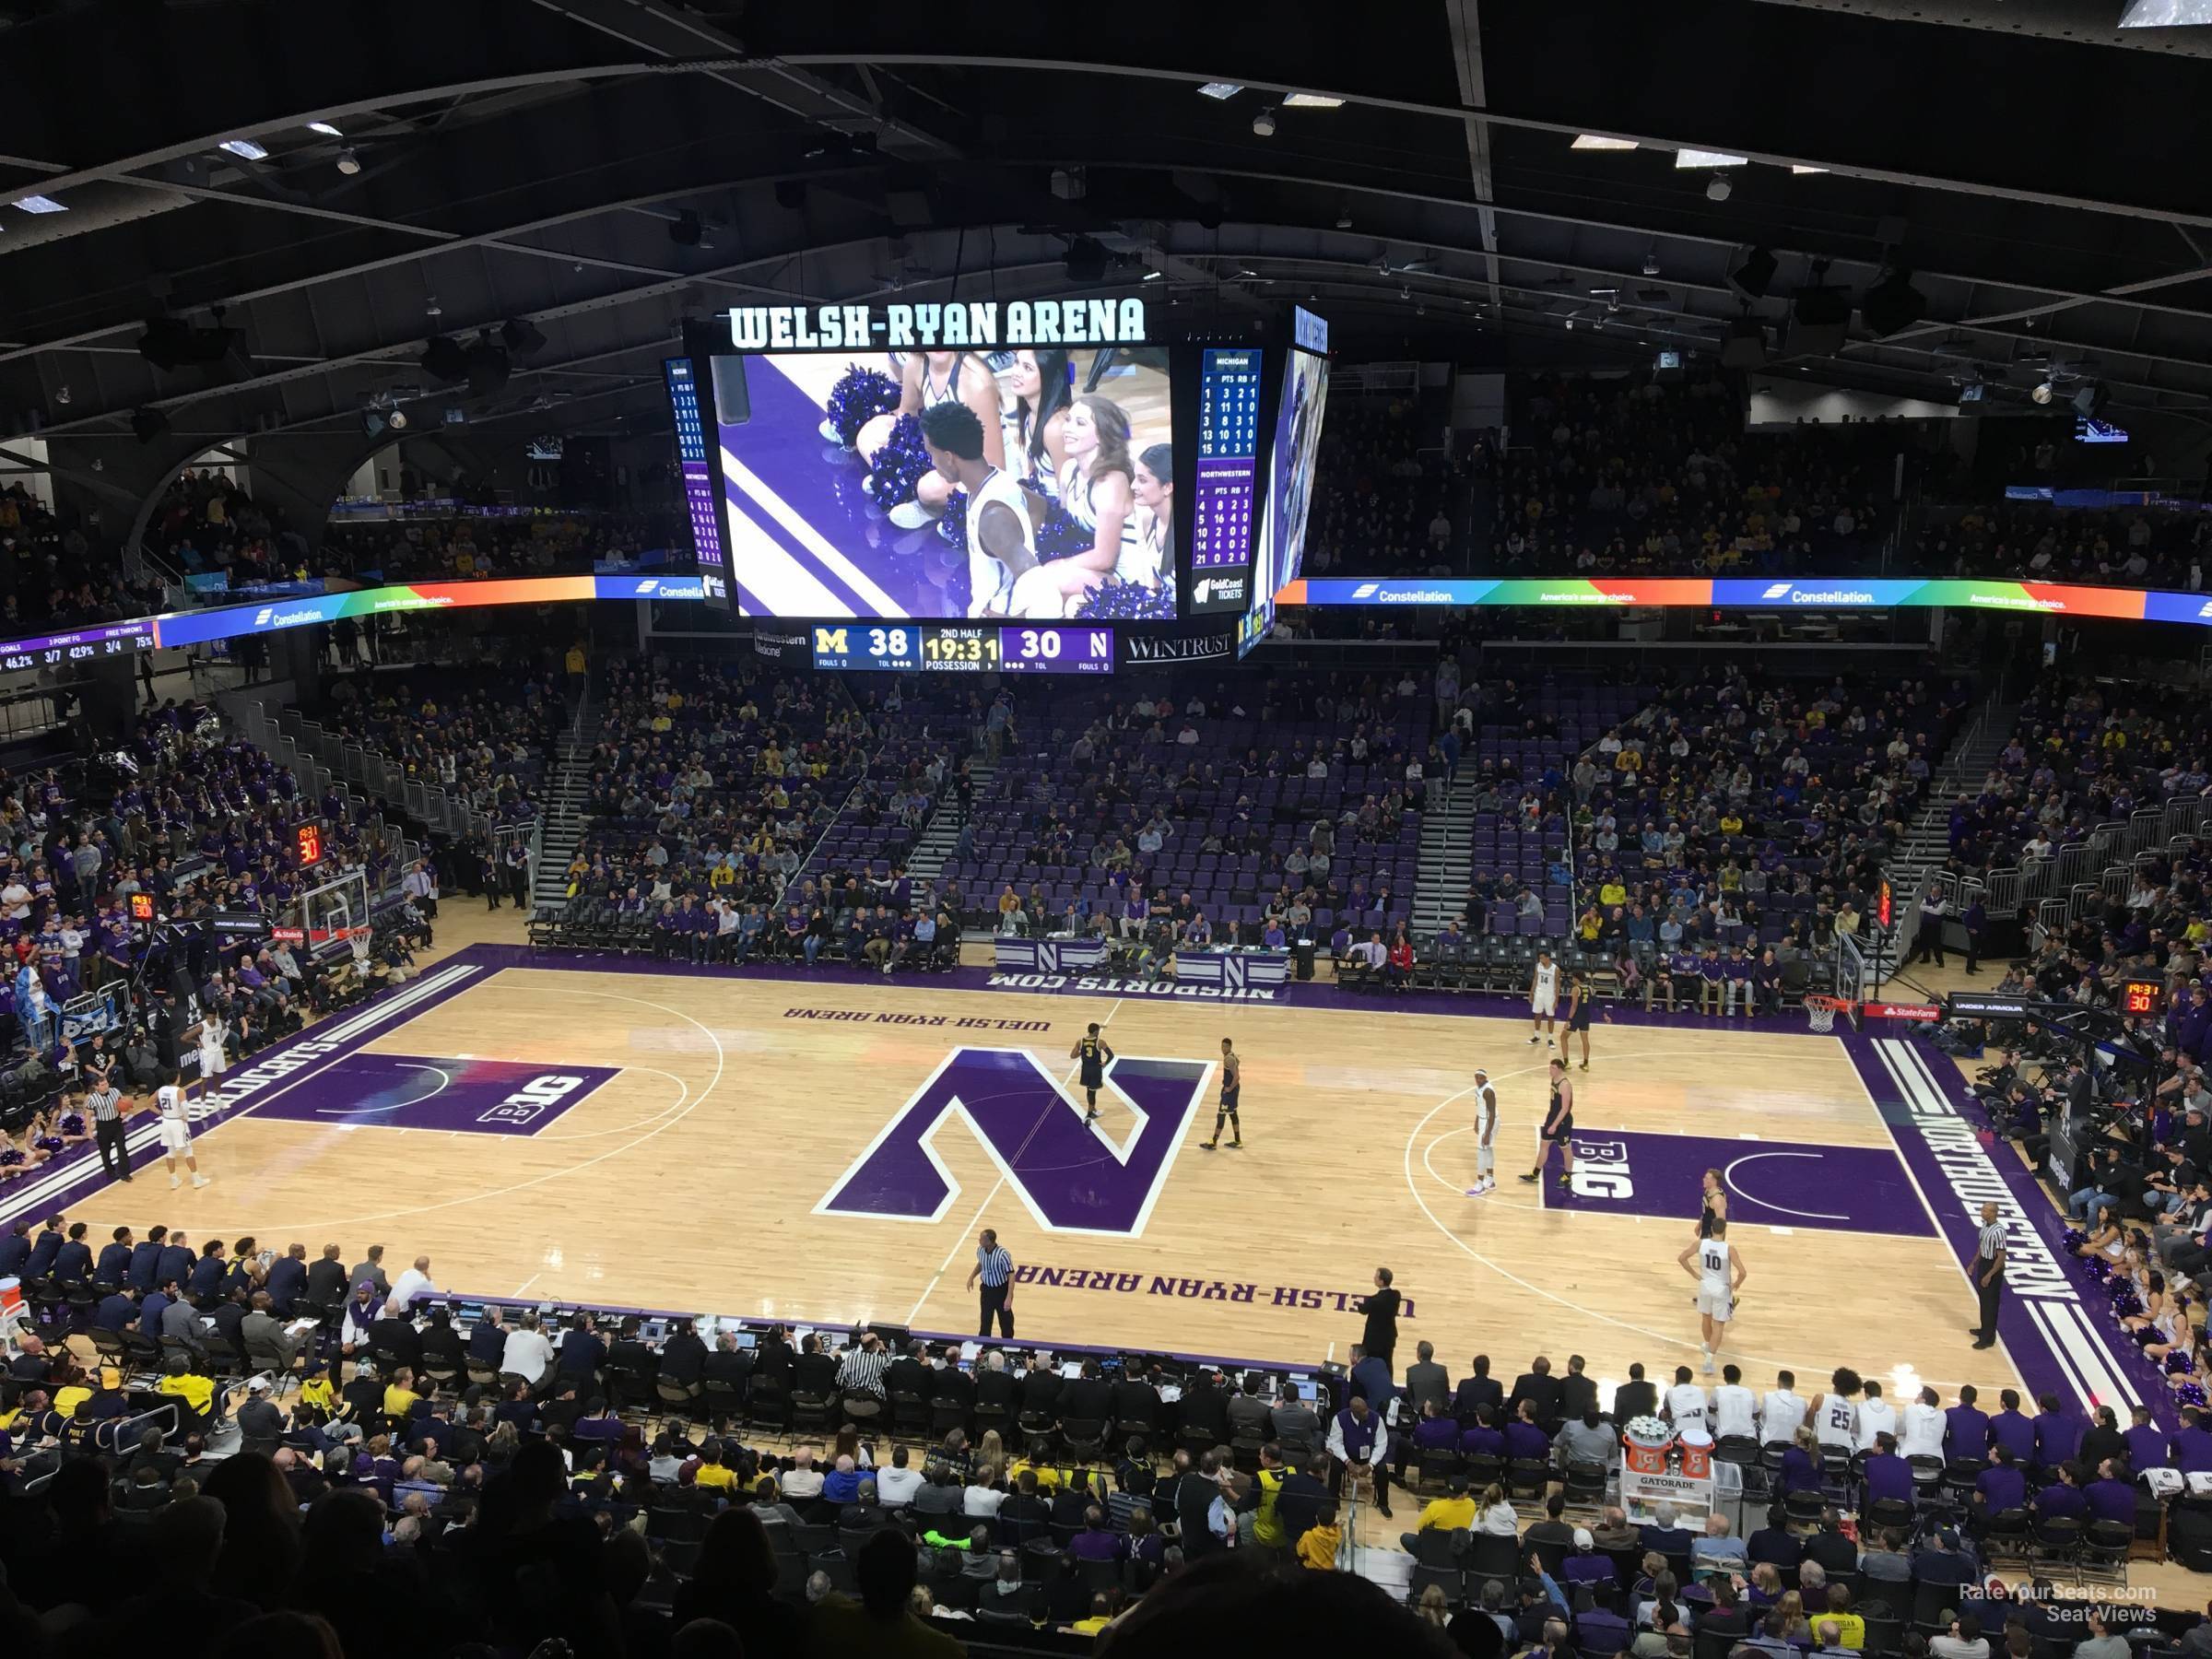 section 208, row 8 seat view  - welsh-ryan arena